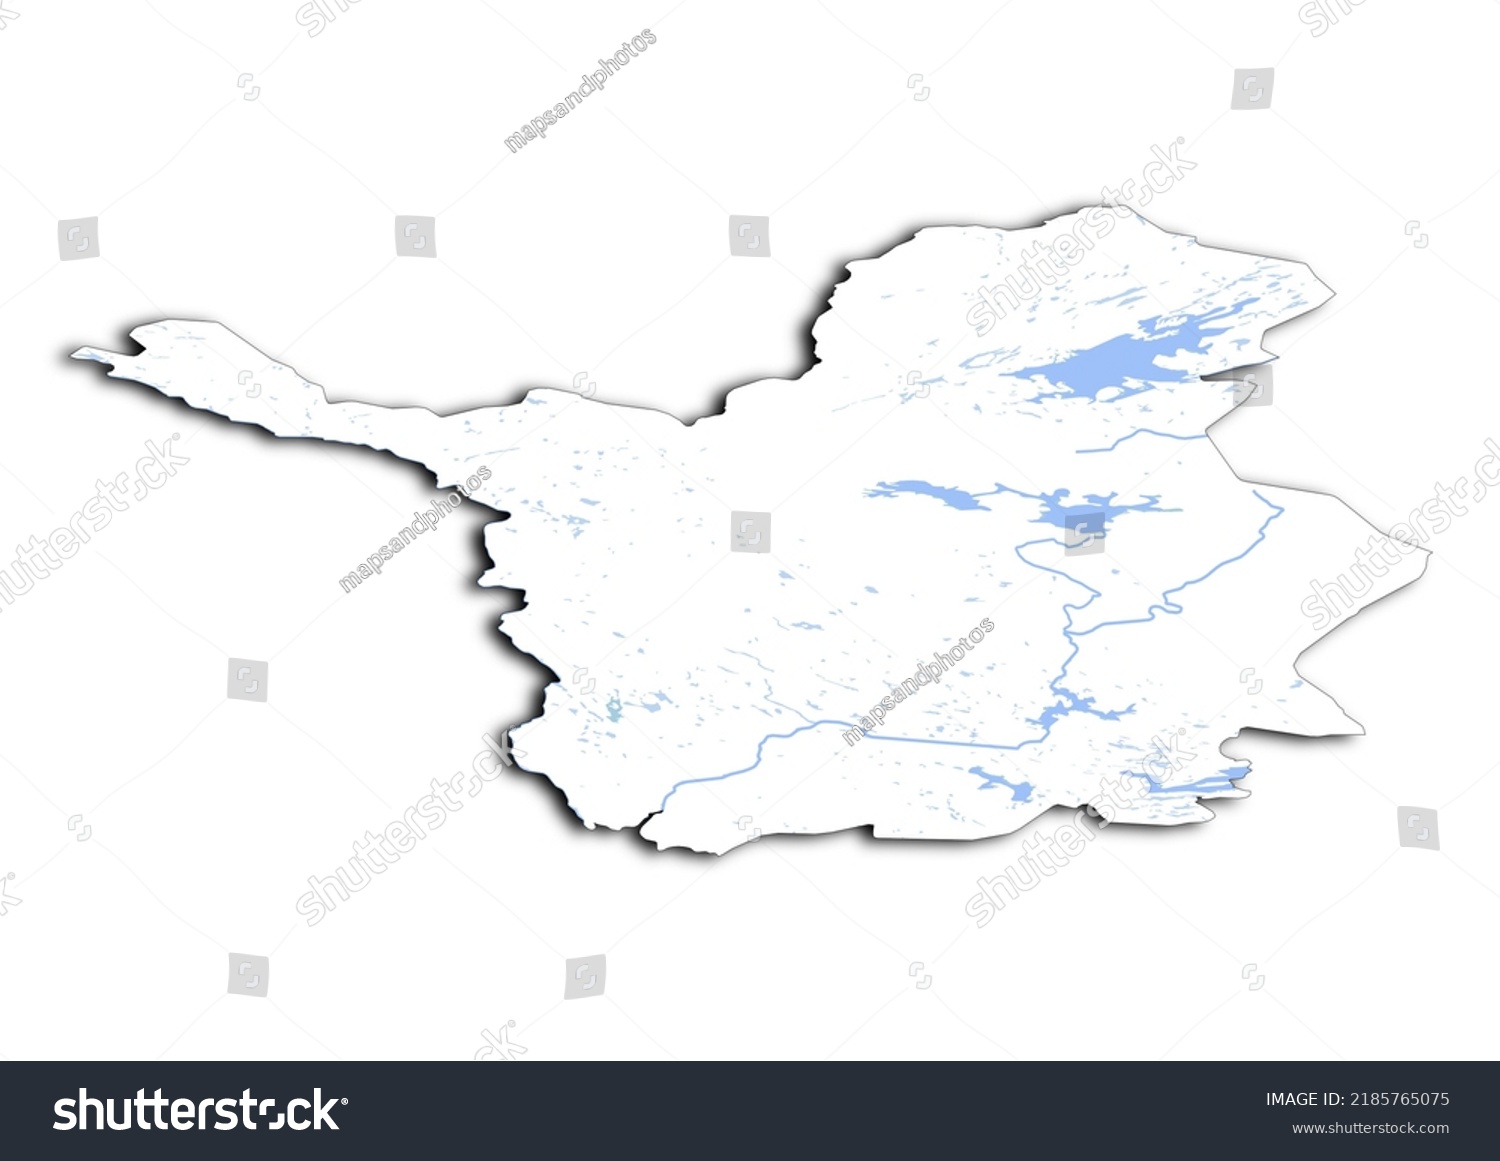 Stock Photo Lapland Finland Map Shaded Relief Map Of Lapland Finland D Render Physical Map 2185765075 